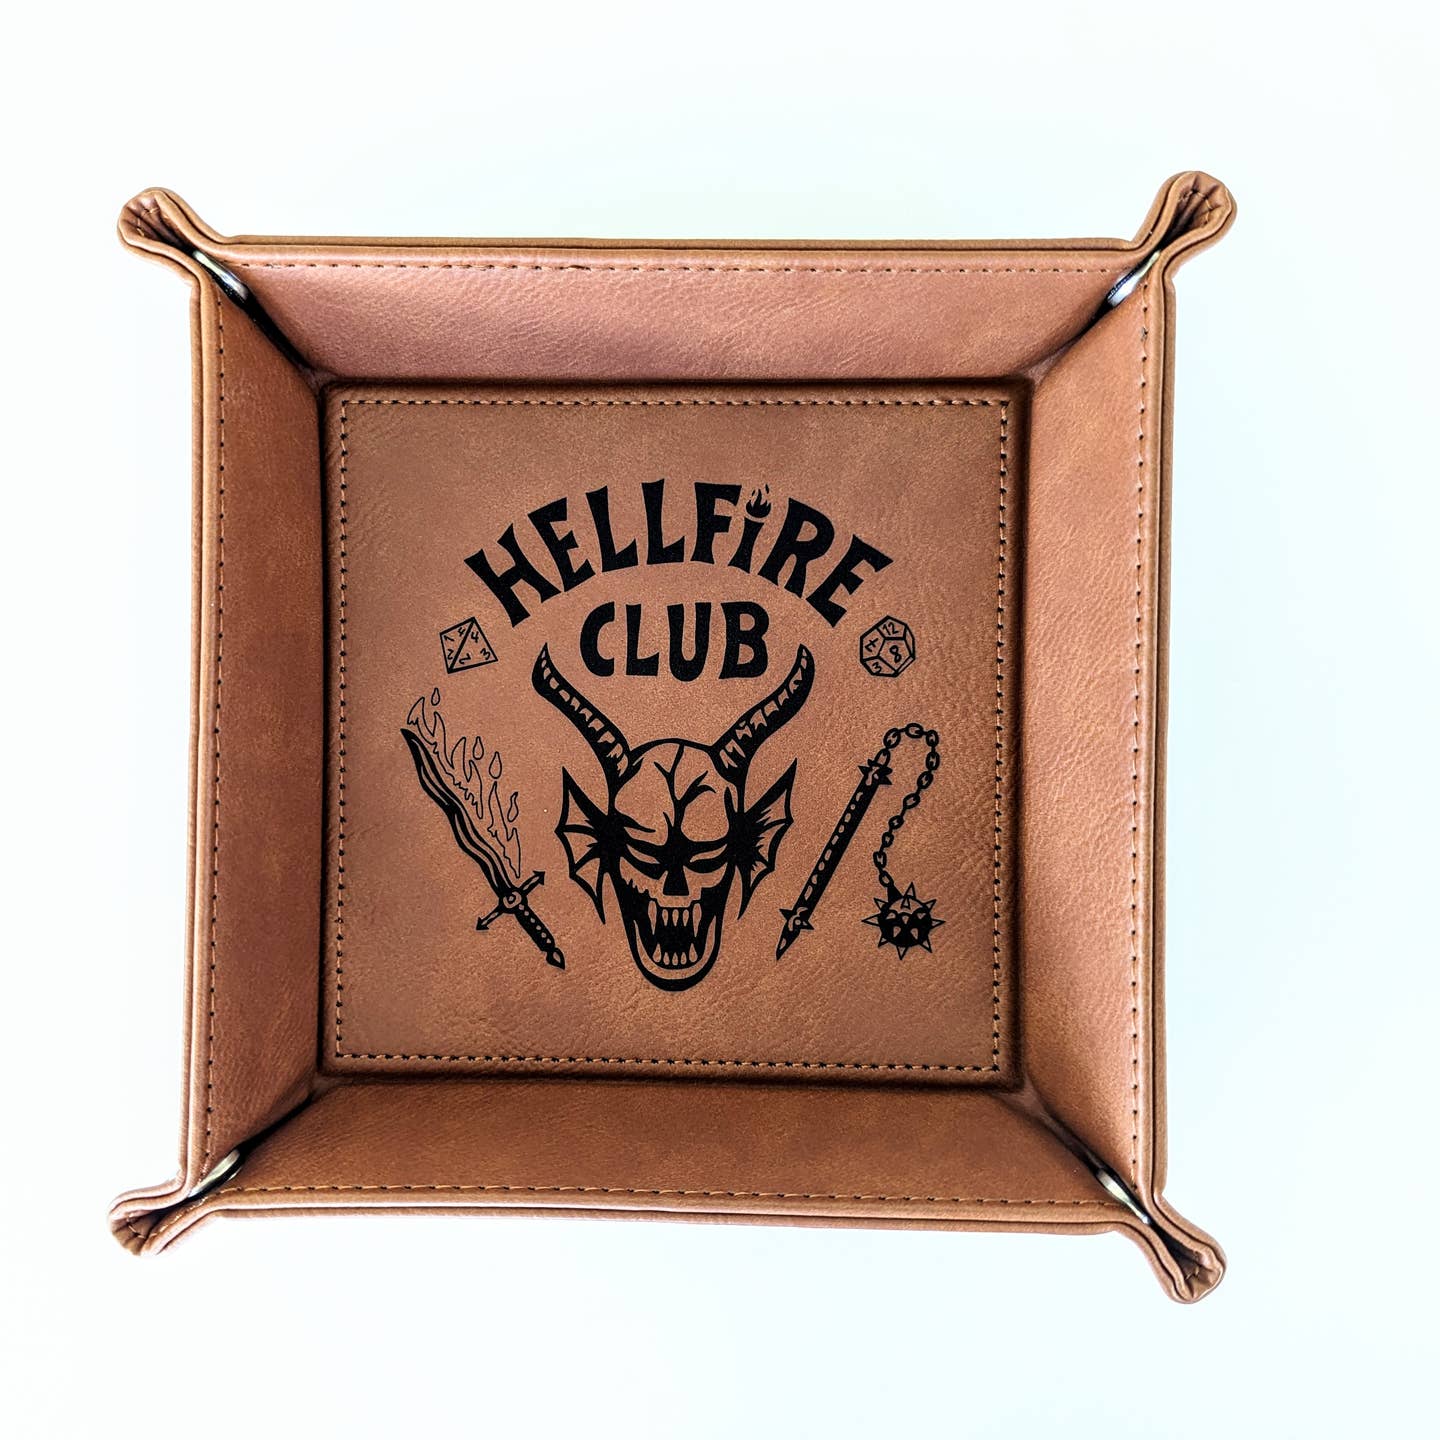 Hellfire Club - D&D - Vegan Leather Dice Rolling Tray - Bards & Cards